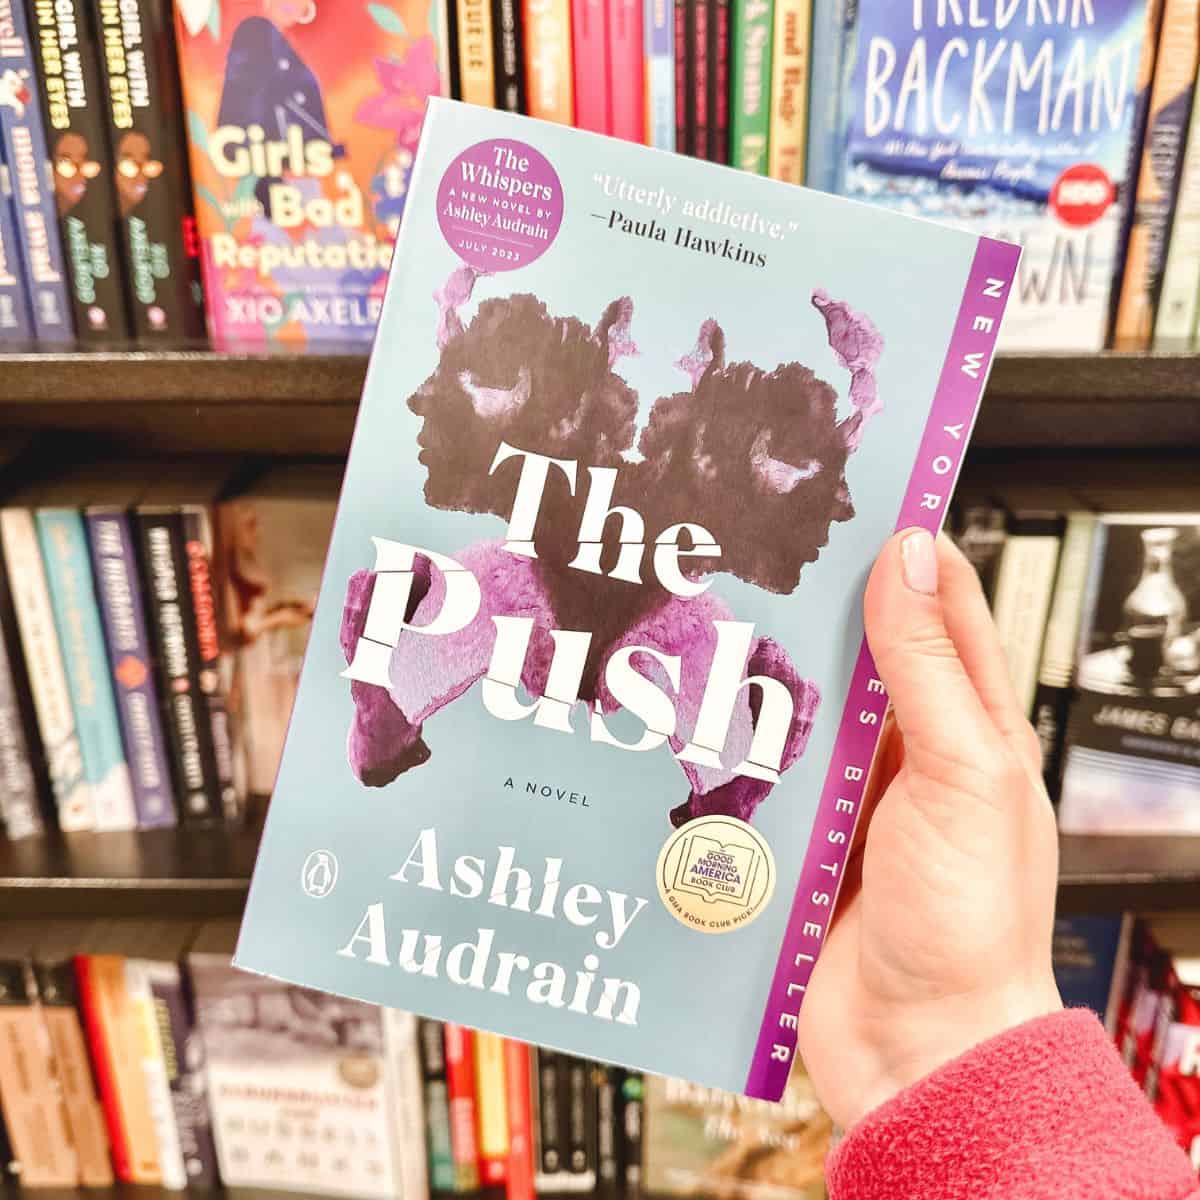 The push by Ashley audraine held in front of a bookshelf.